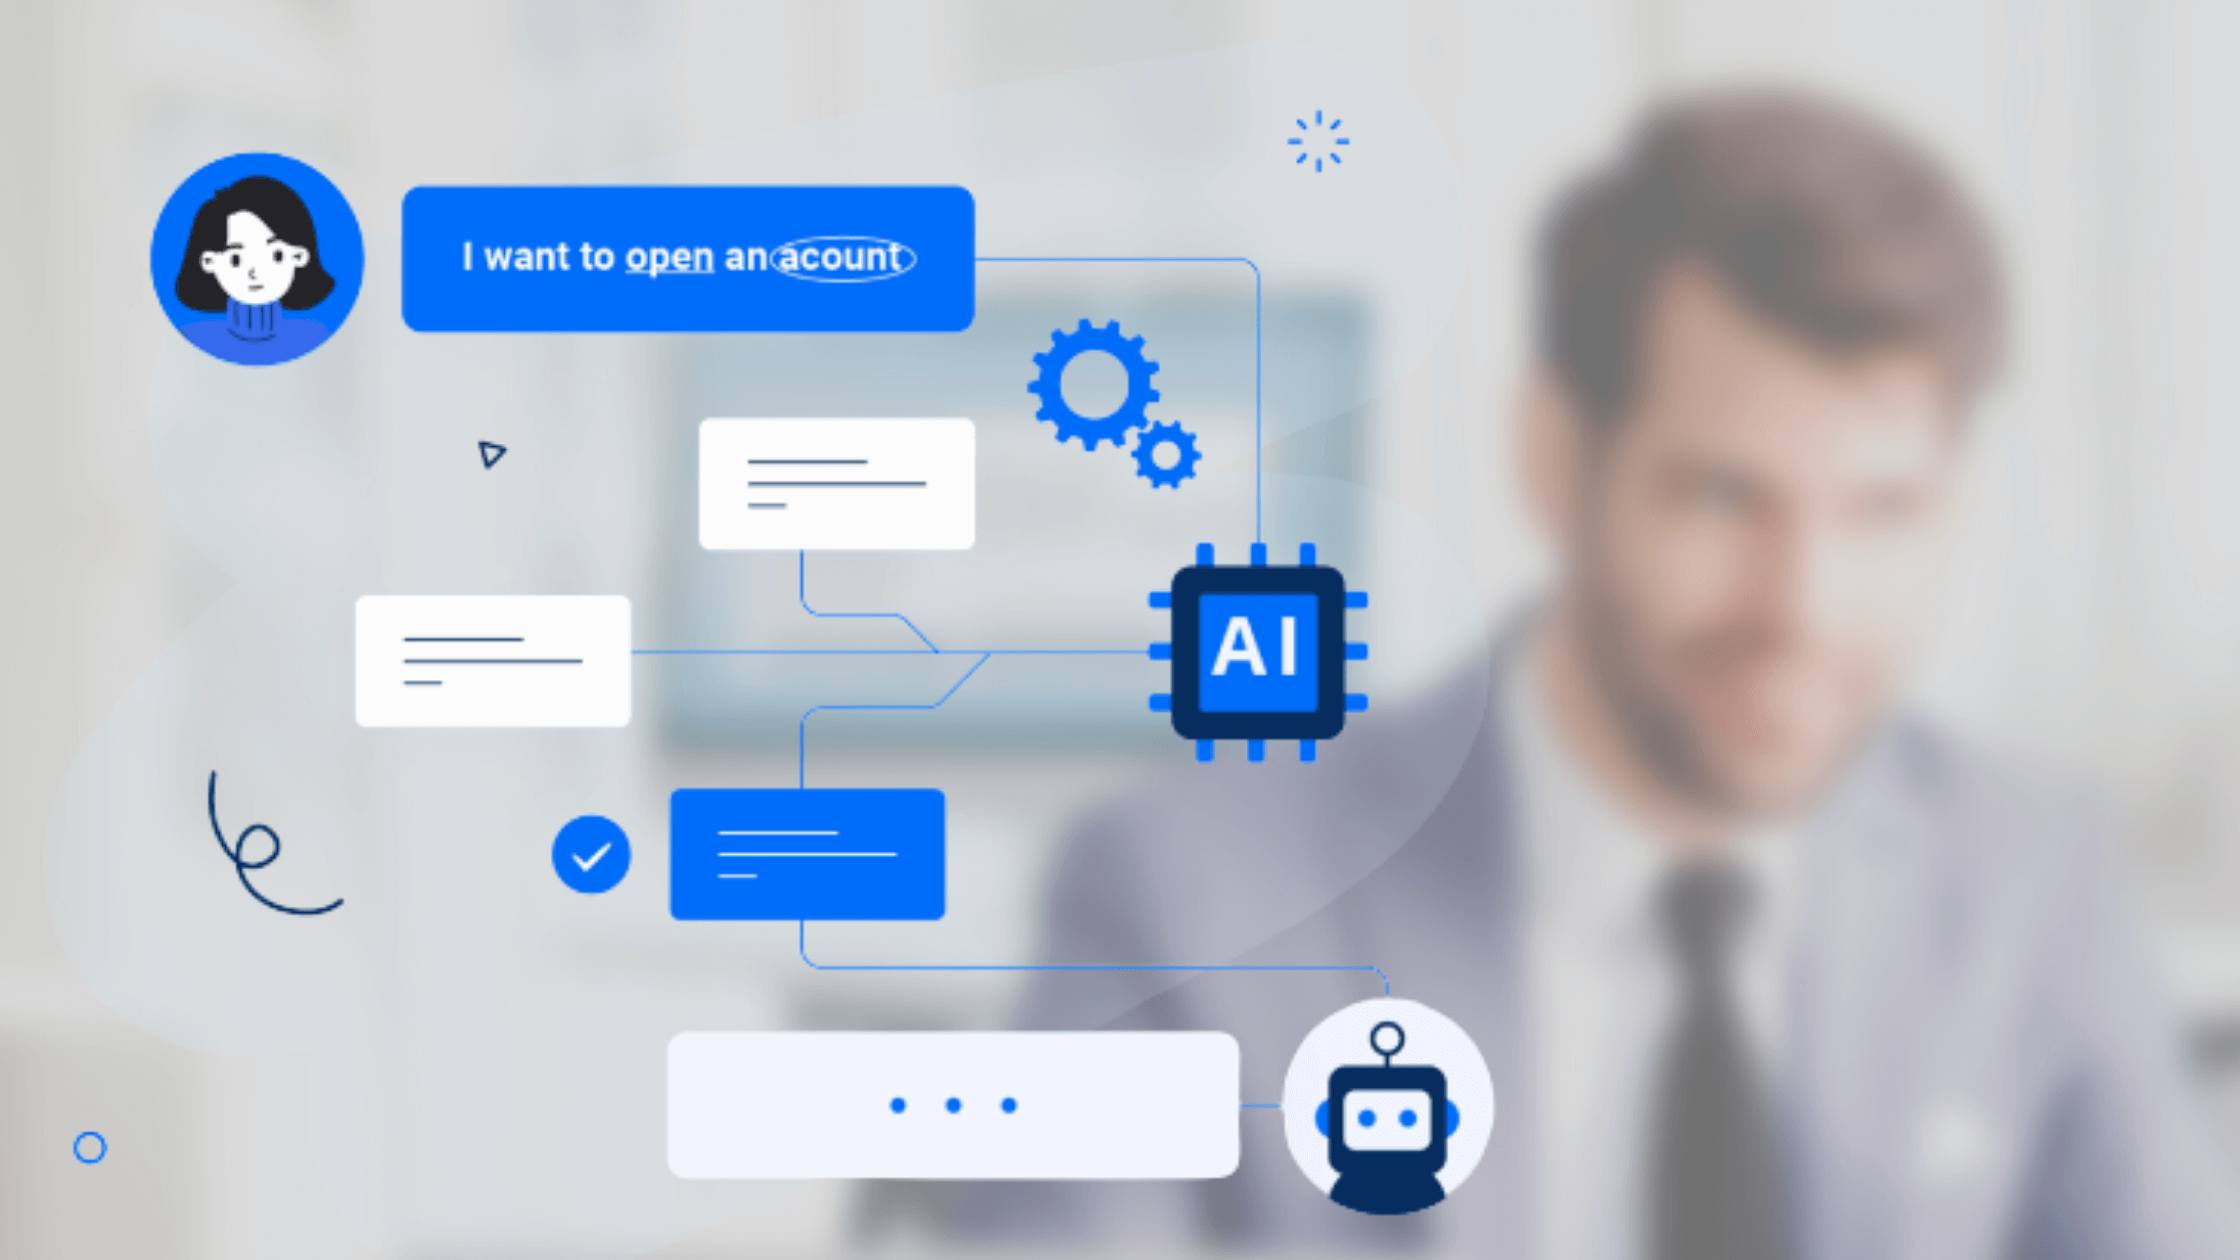 use cases of chatbots in banking